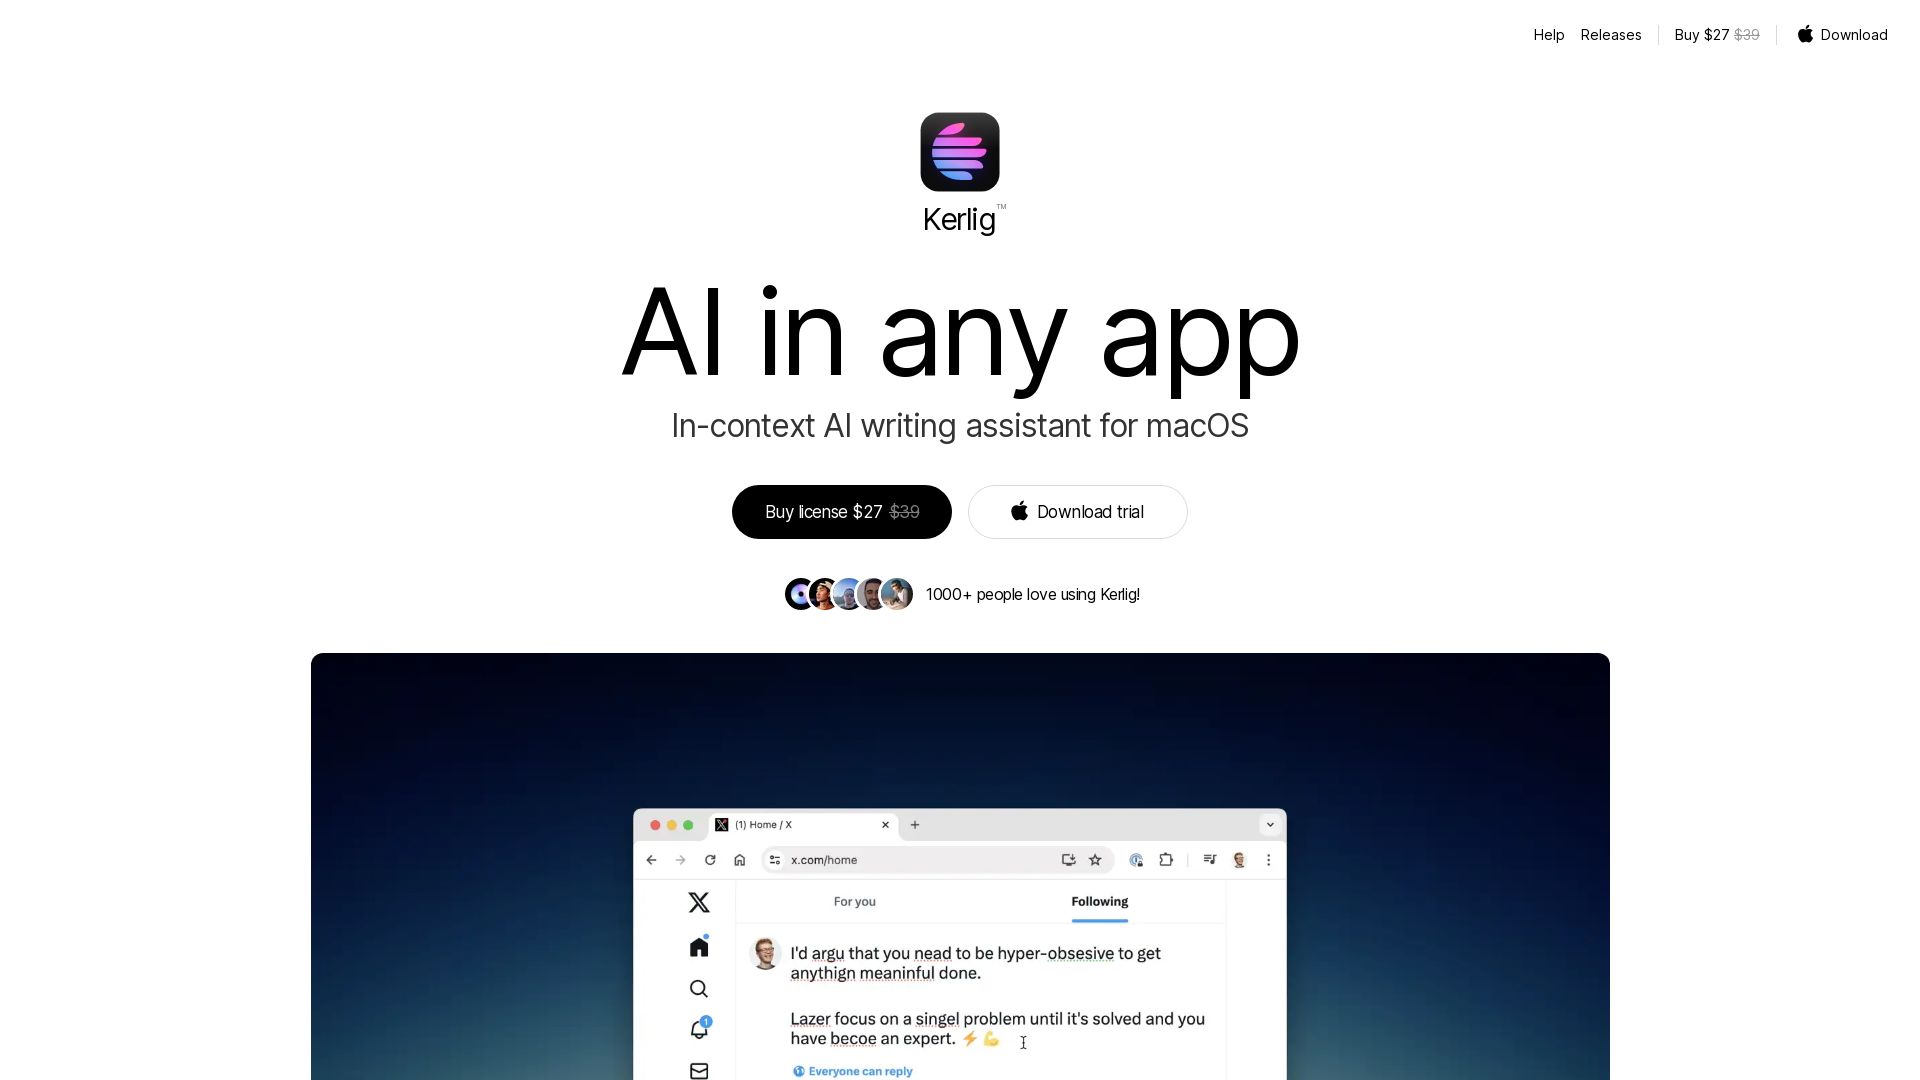 Kerlig™ - In-context AI writing assistant for macOS